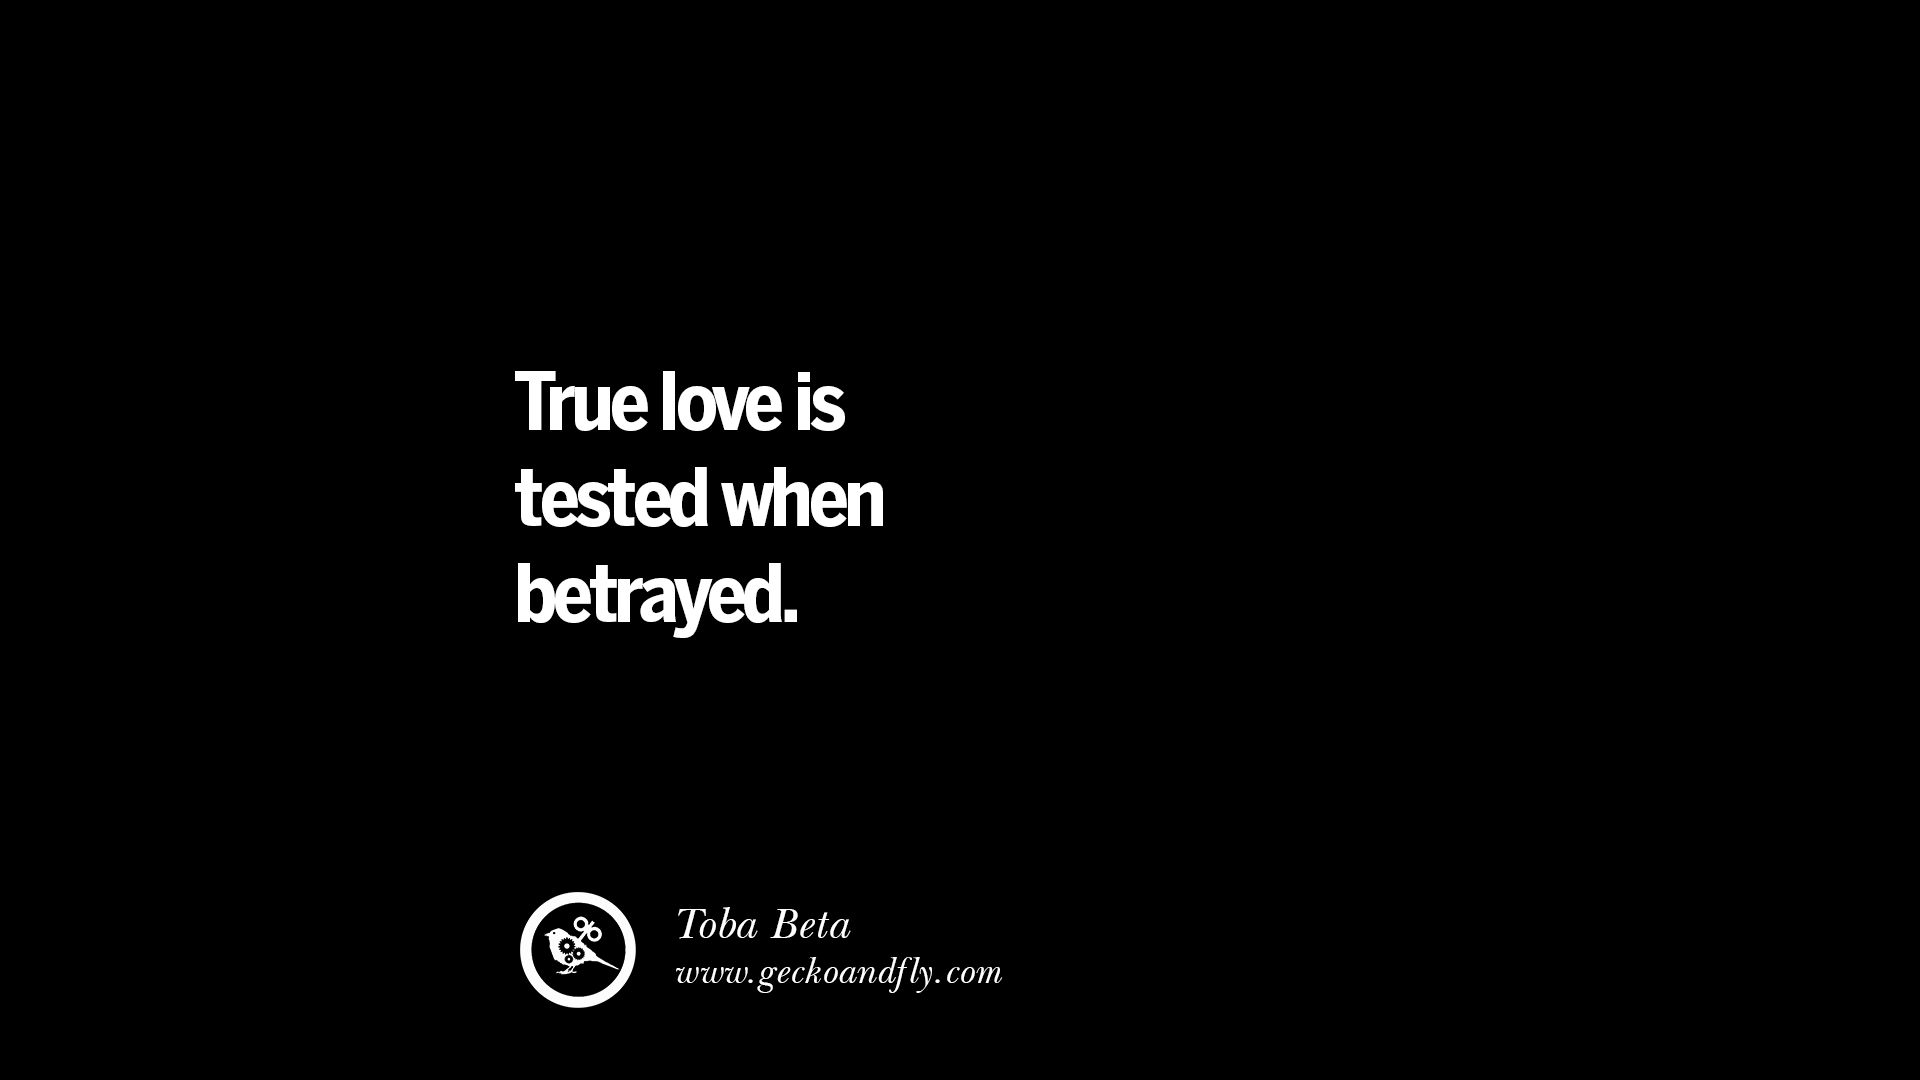 Quotes on Friendship, Trust and Love Betrayal True love is tested when ...